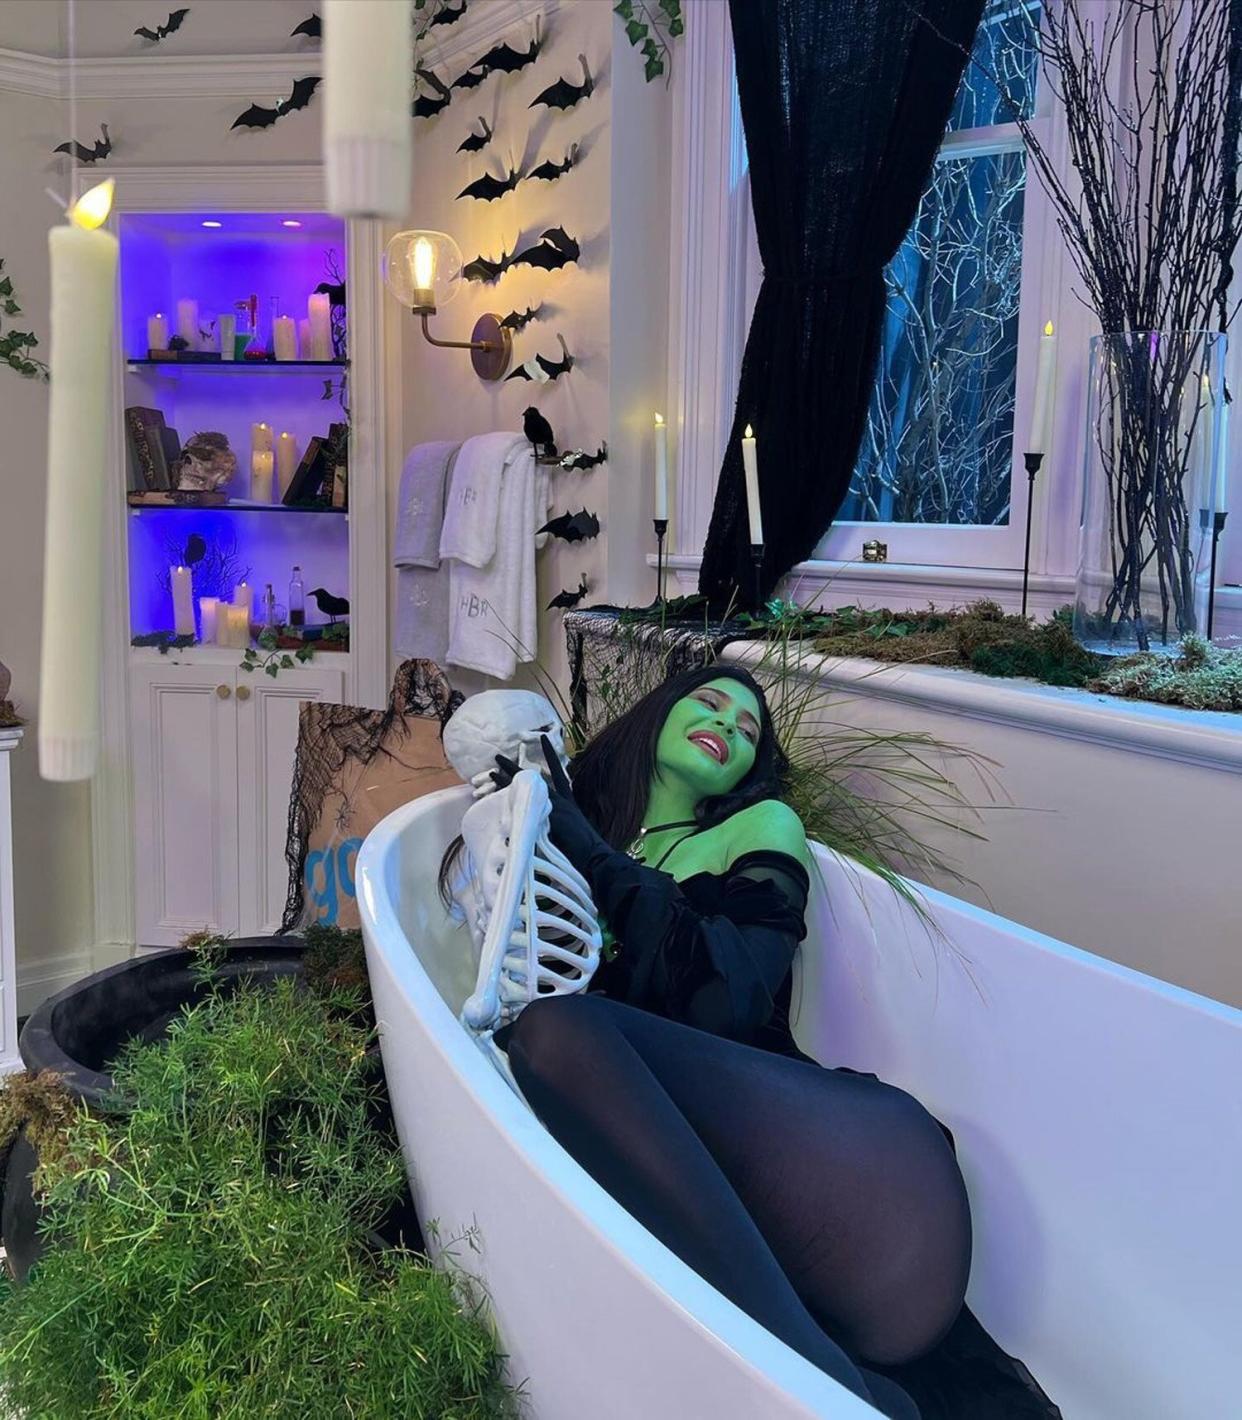 Kylie Jenner painted green lies in a bathtub